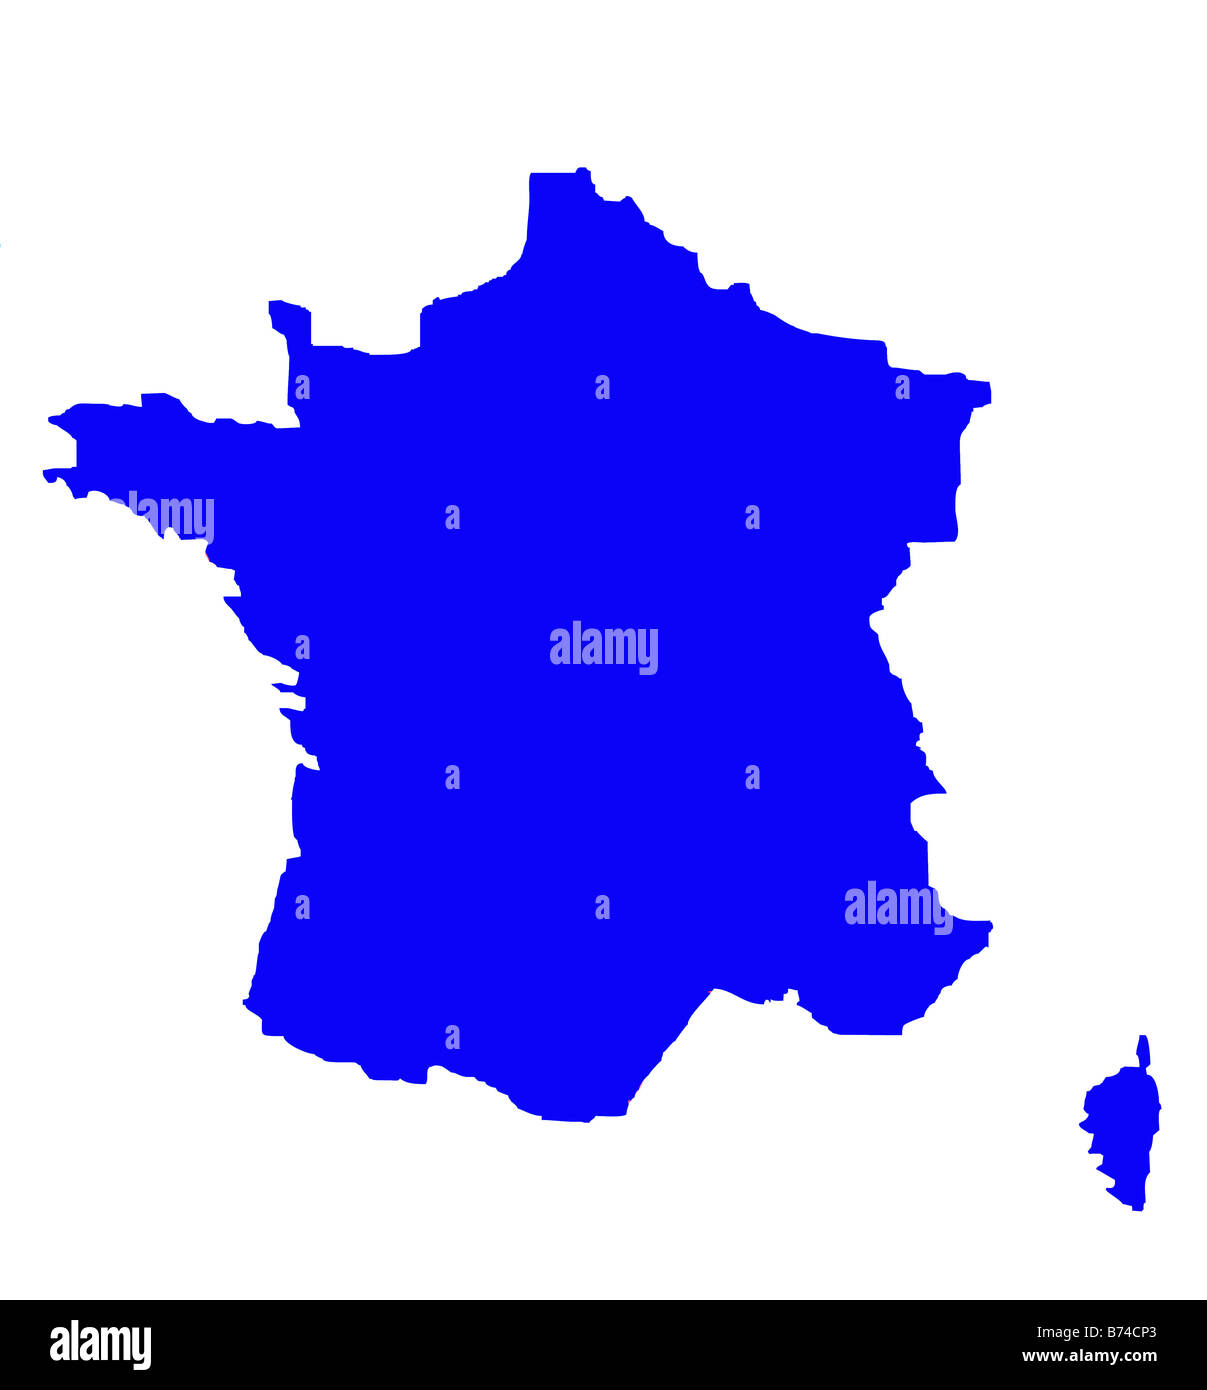 Outline map of country of France in blue isolated on white background Stock Photo